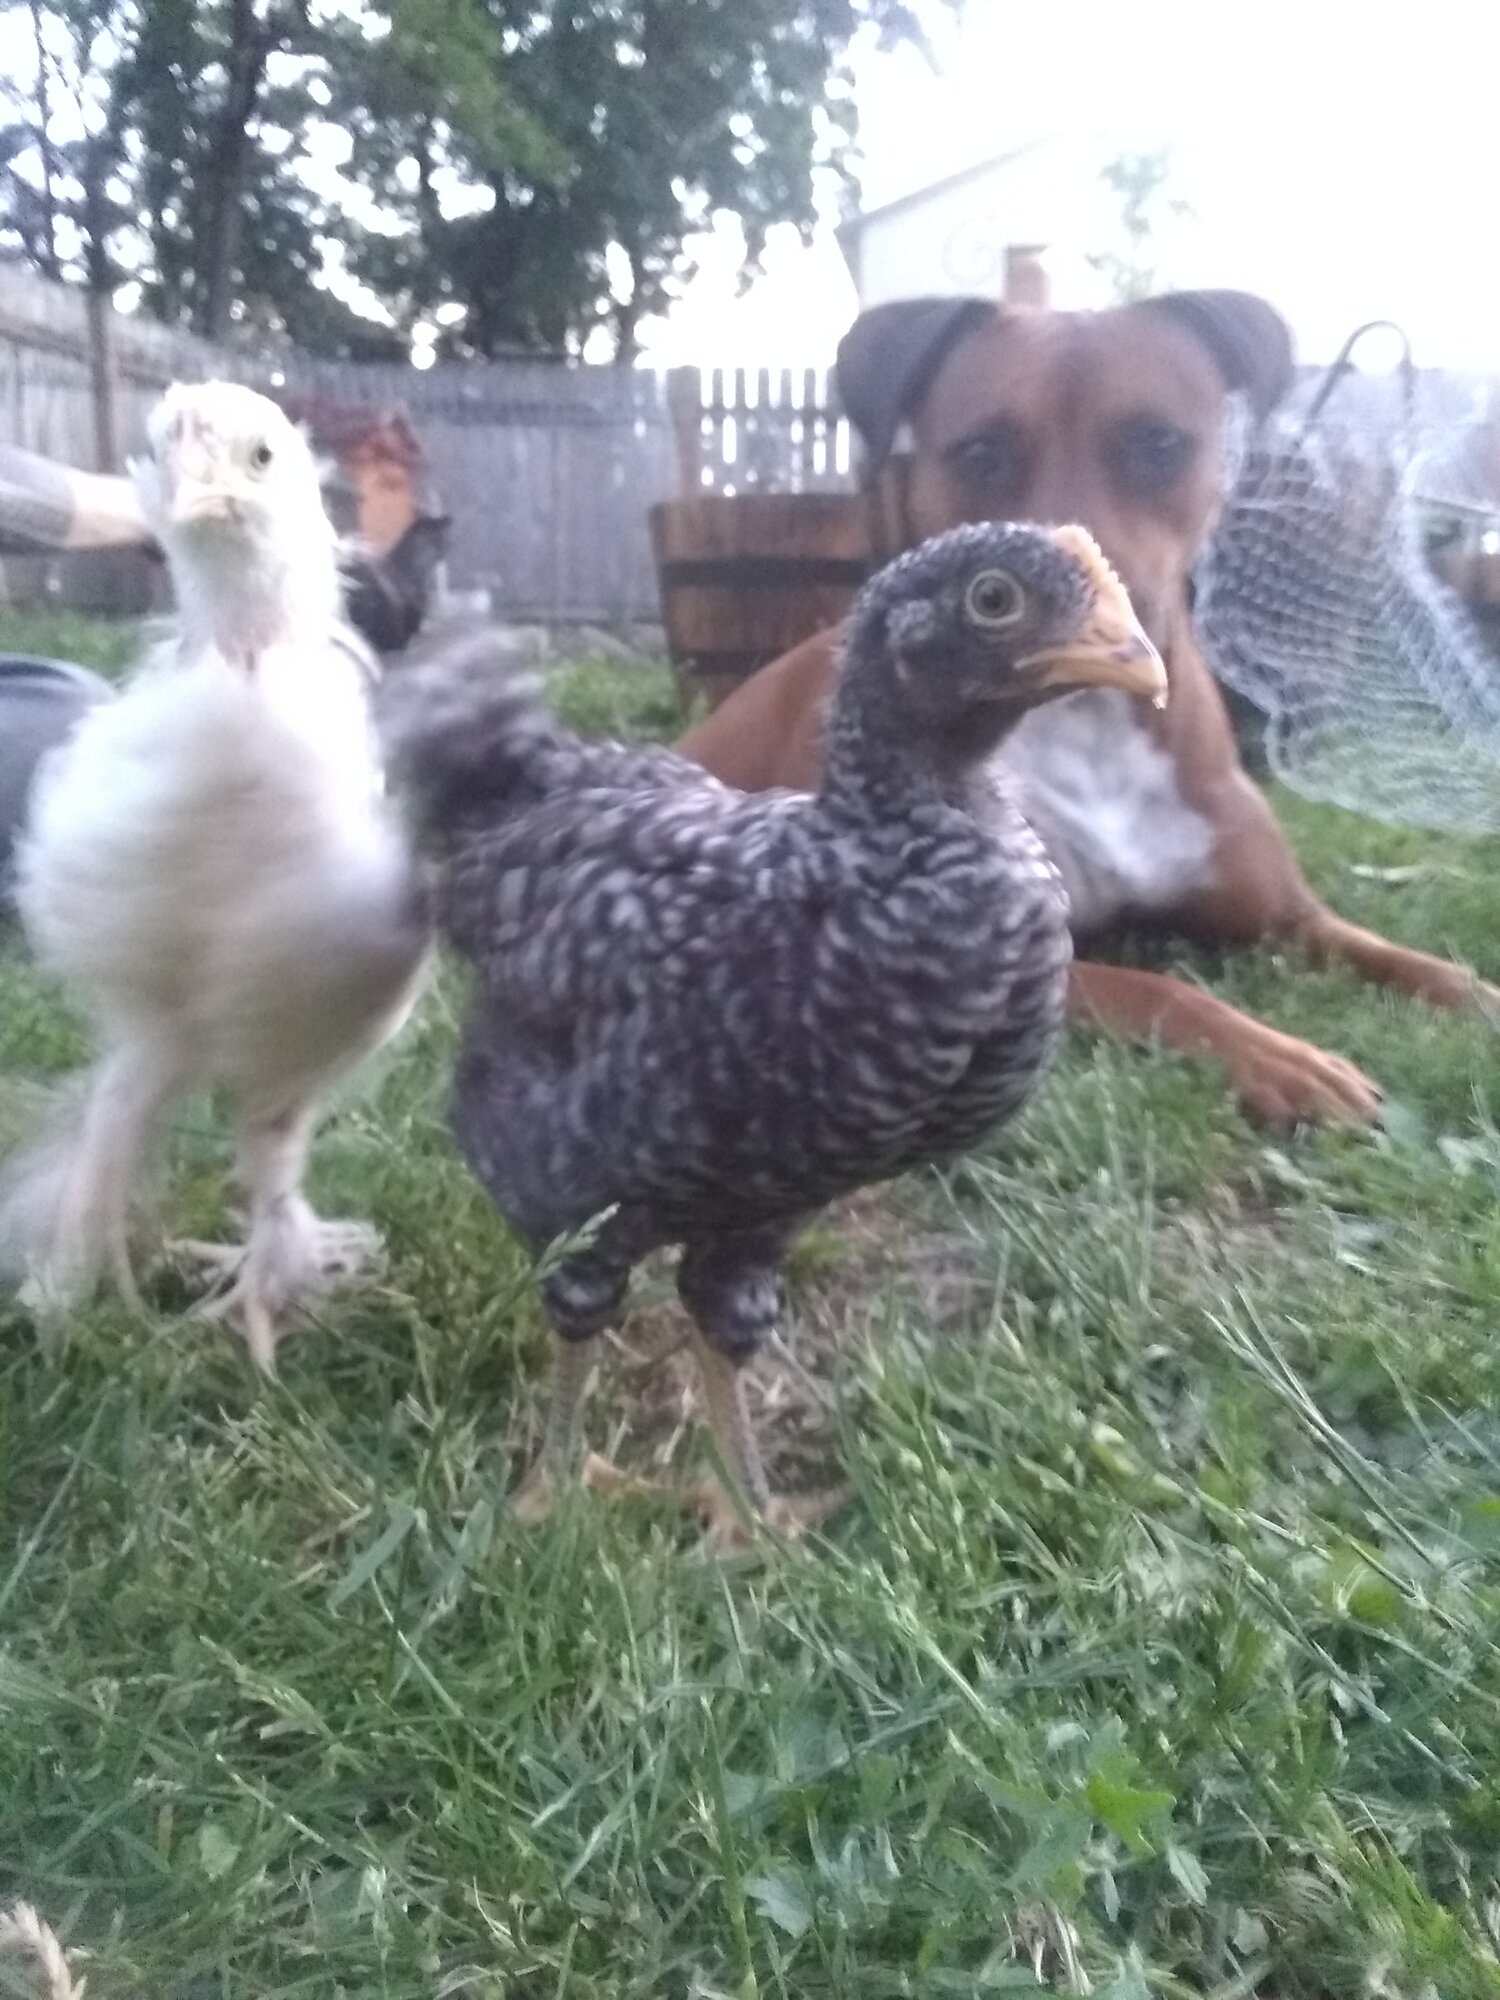 4-5 week old chicks go outside for first time